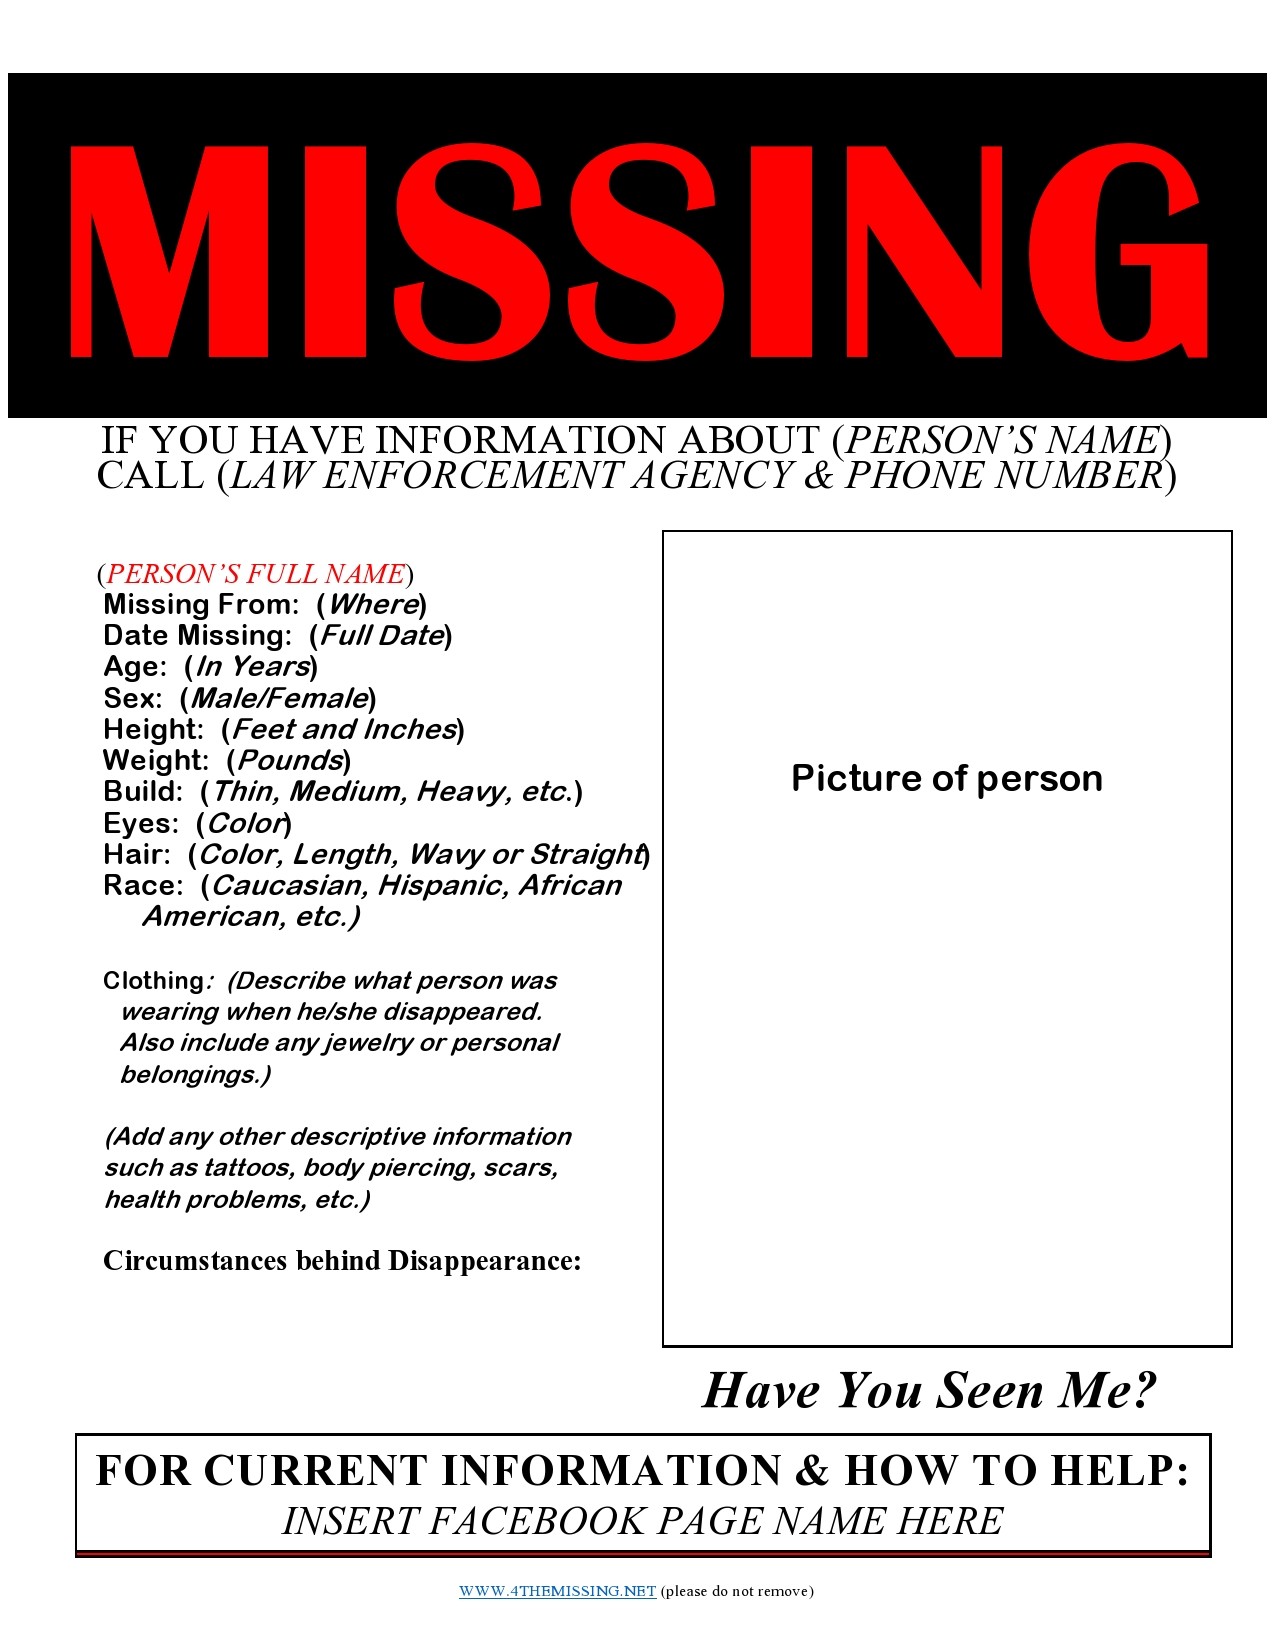 Missing Person Poster Have You Seen Me